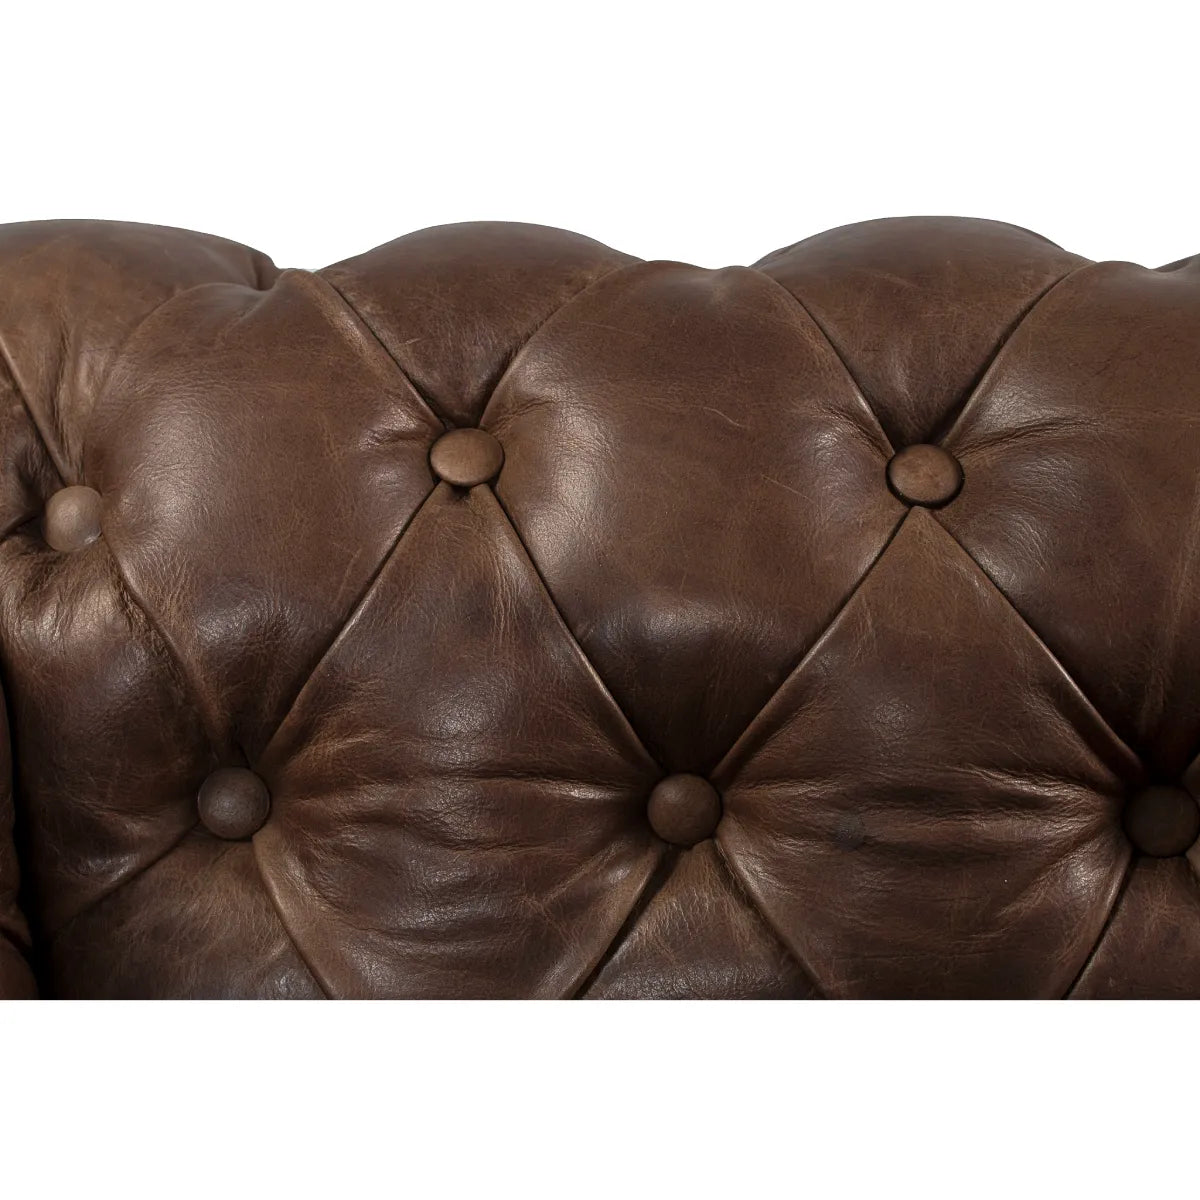 Genuine Leather Chesterfield Three Seater Sofa In Brown Colour